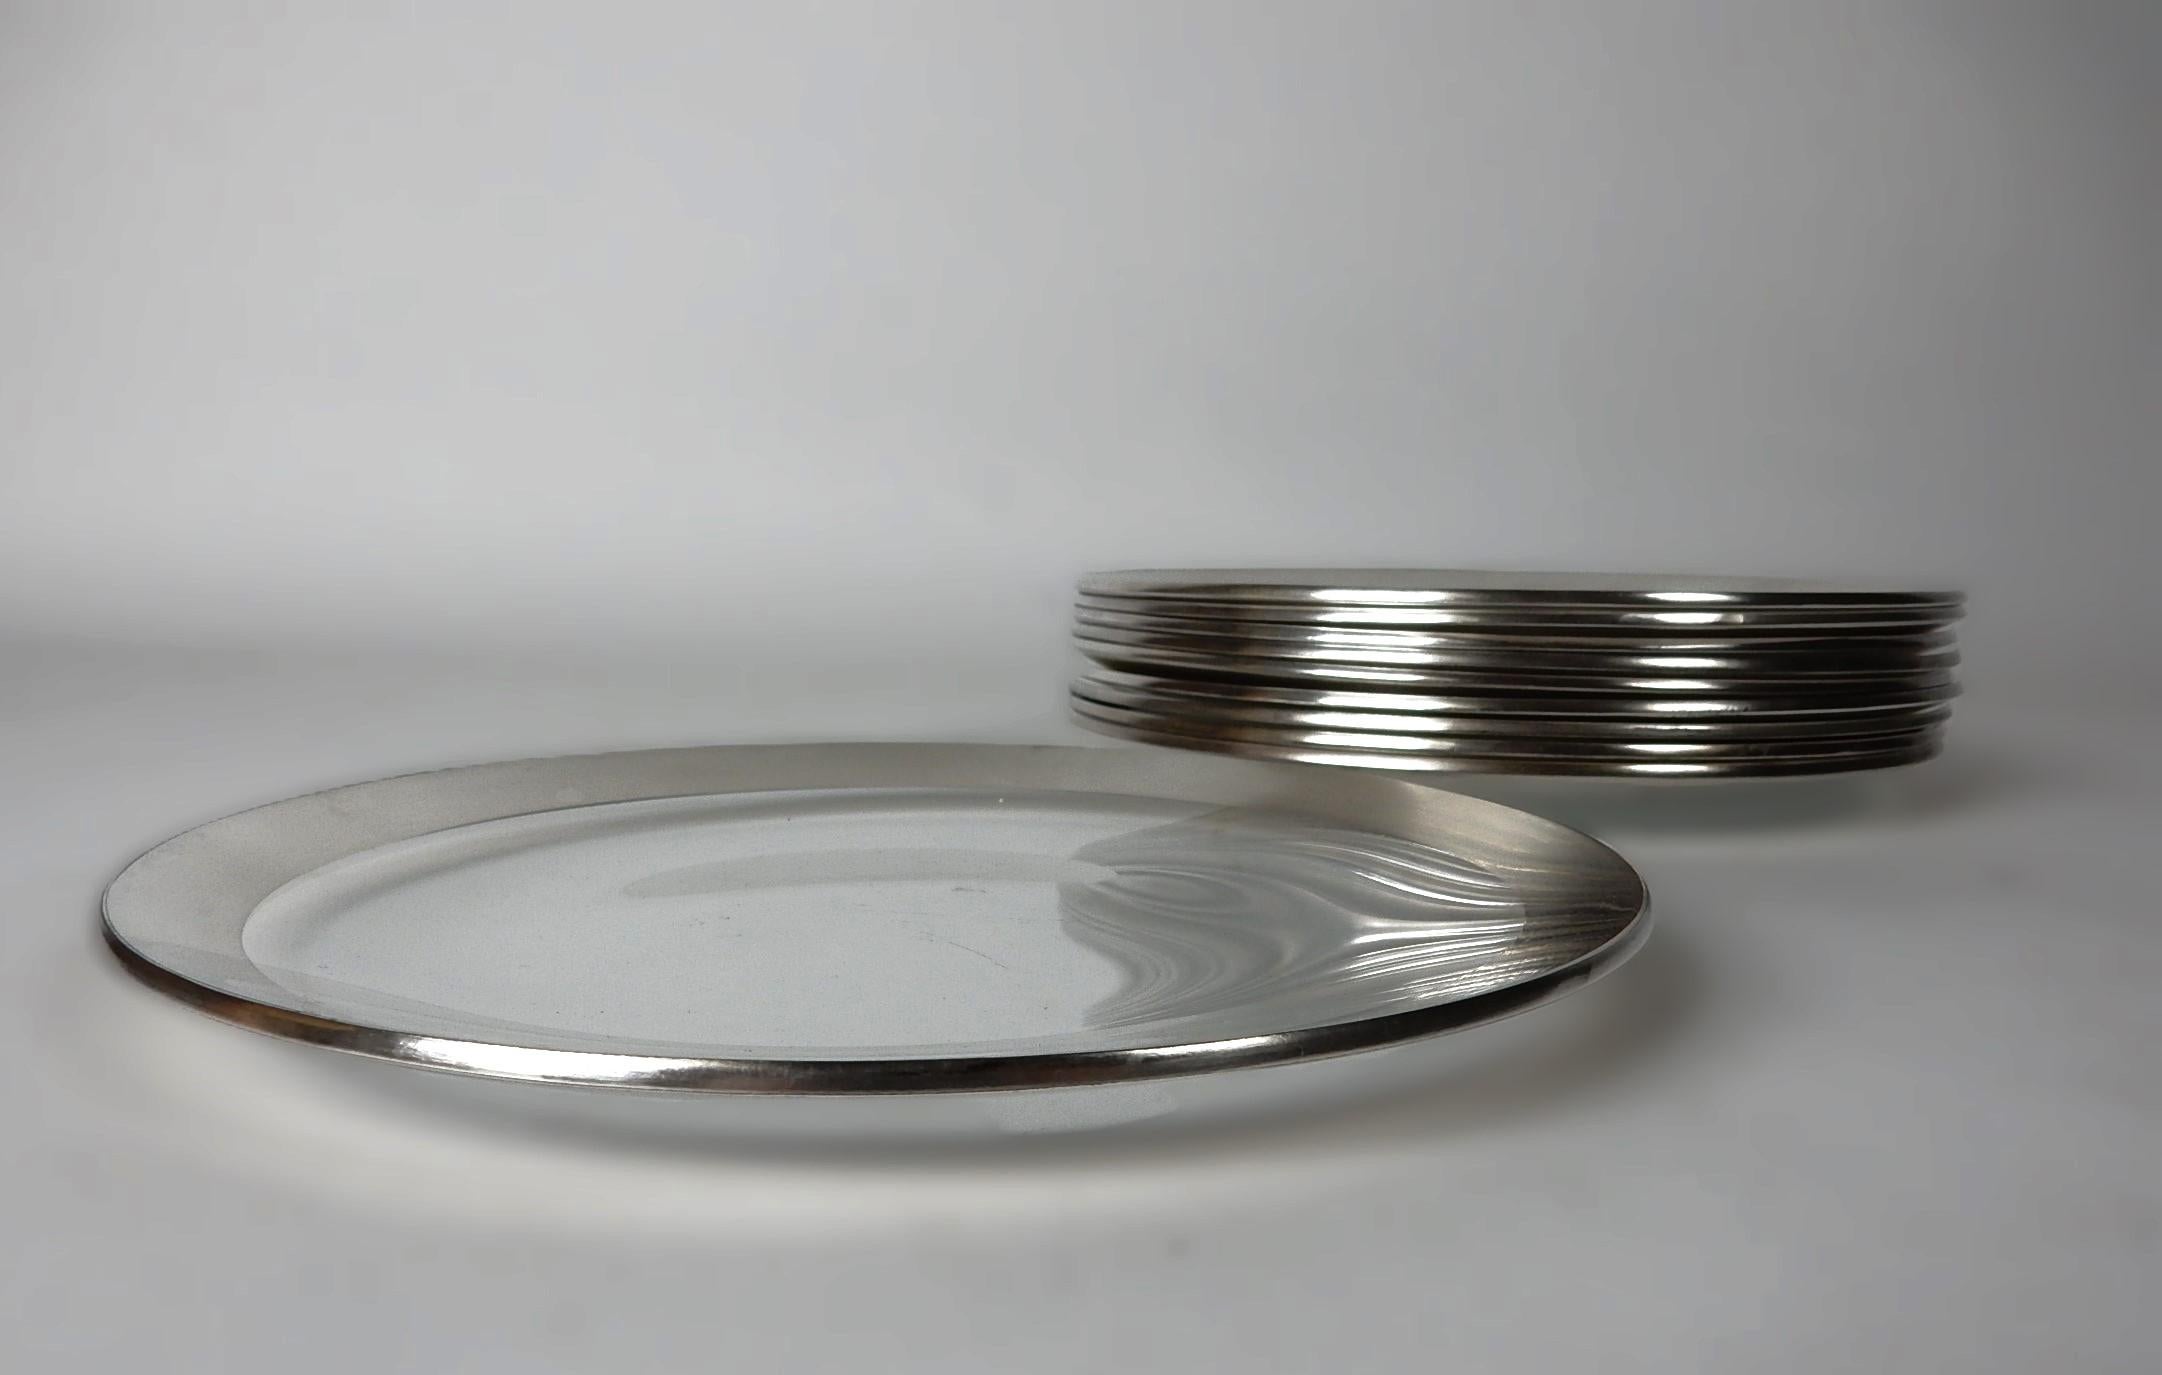 A set of 10 Dorothy Thorpe design 8in salad or desert plates with a 1/2in sterling silver banded edge.
These show some pre-owned use but still very presentable.  